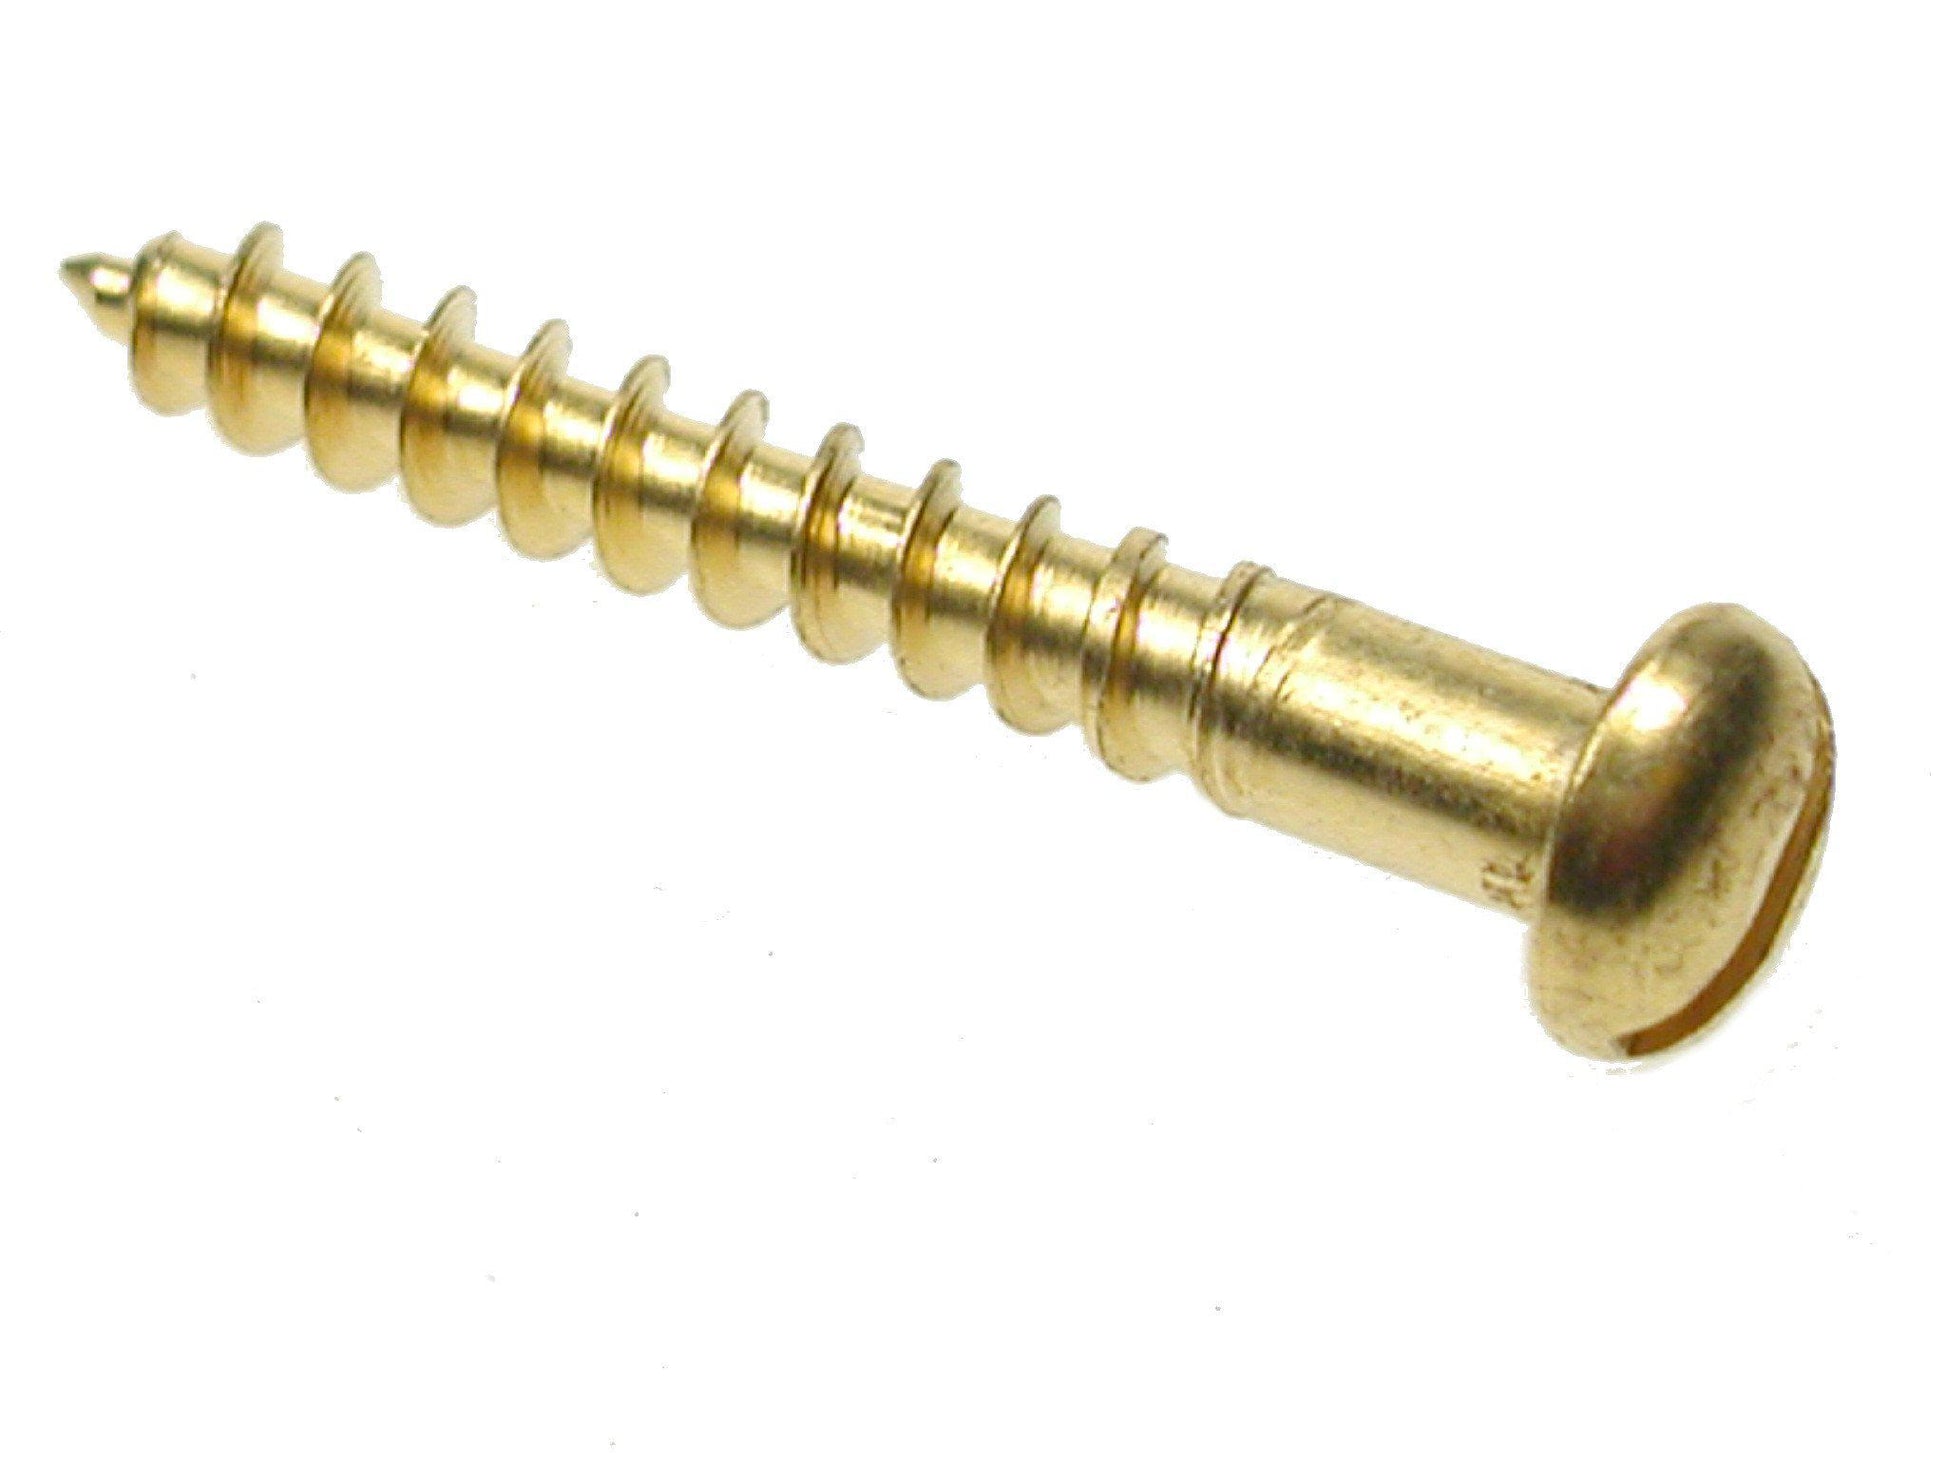 No. 12, Solid Brass, Round, Slotted, Woodscrews Wood Screws No. 12, Solid Brass, Round, Slotted, Woodscrews Brass - Round/ Slotted